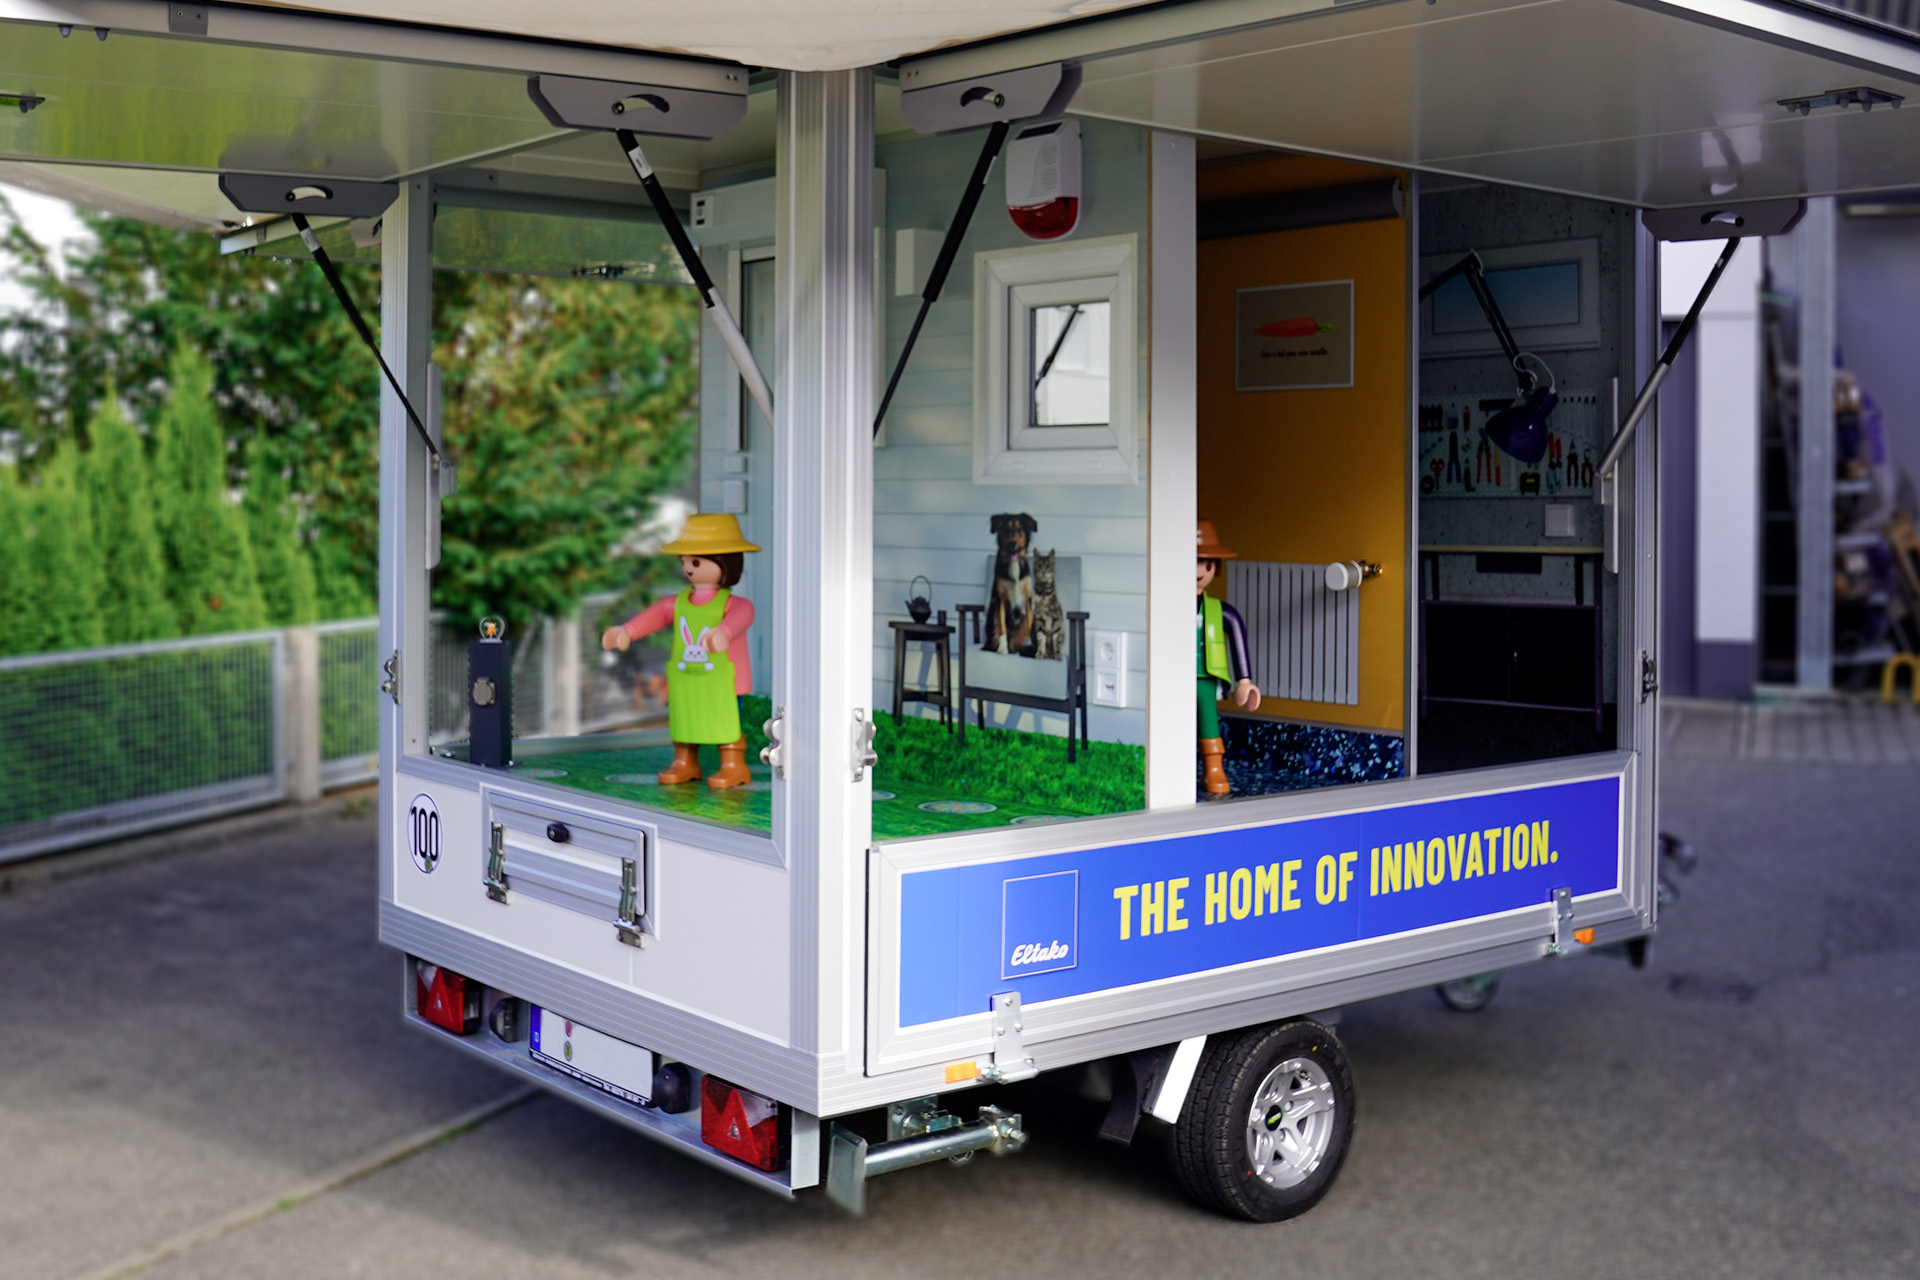 The Home of Innovation on two wheels – Our new exhibition trailer